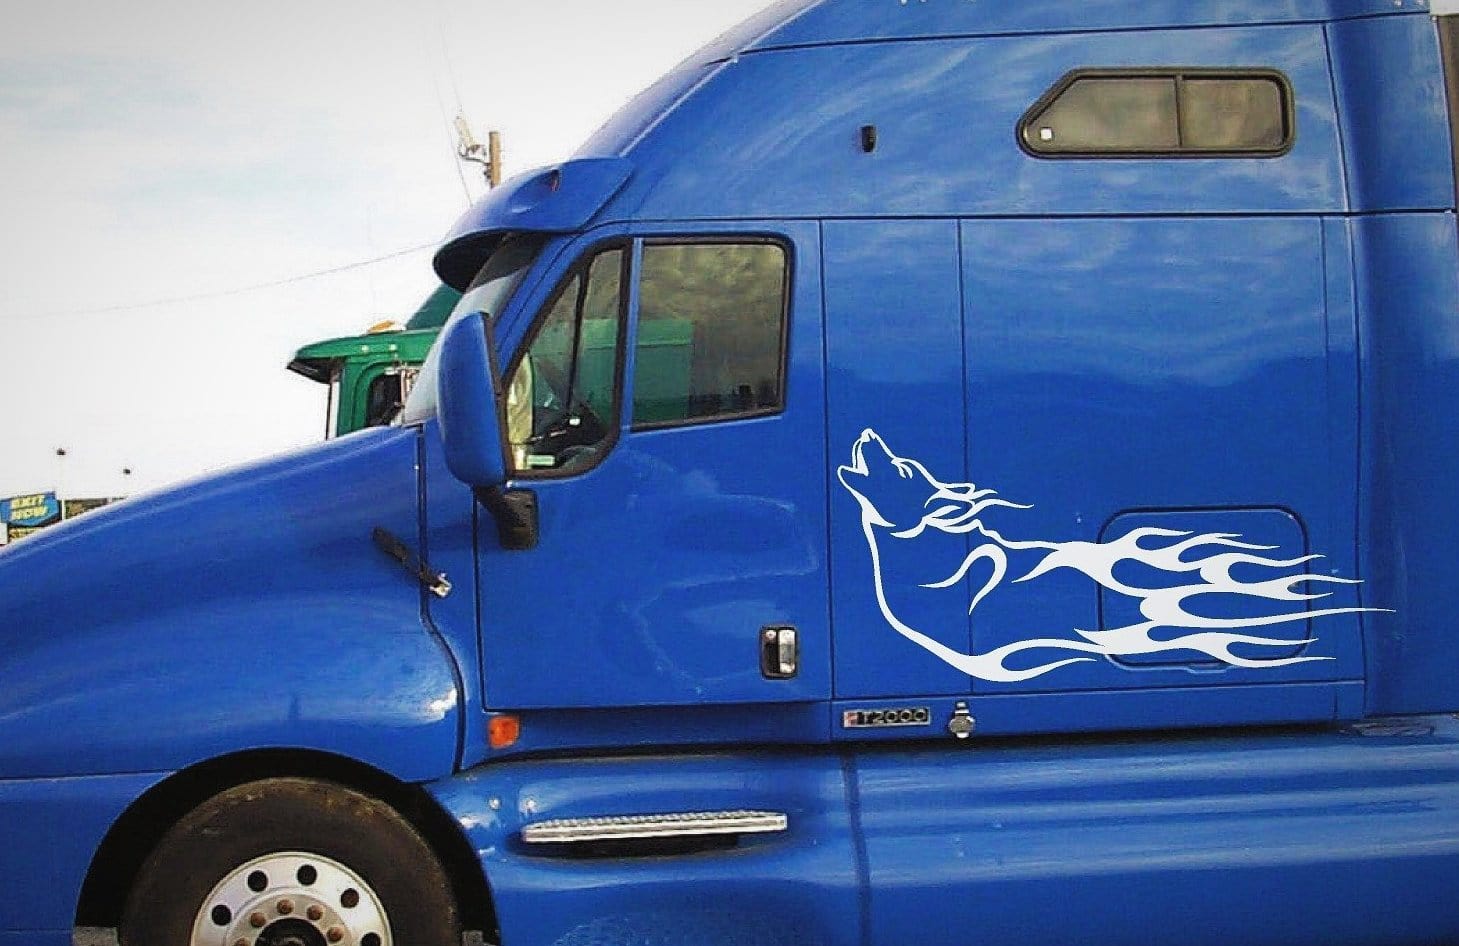 wolf howling Flames vinyl decal on blue semi